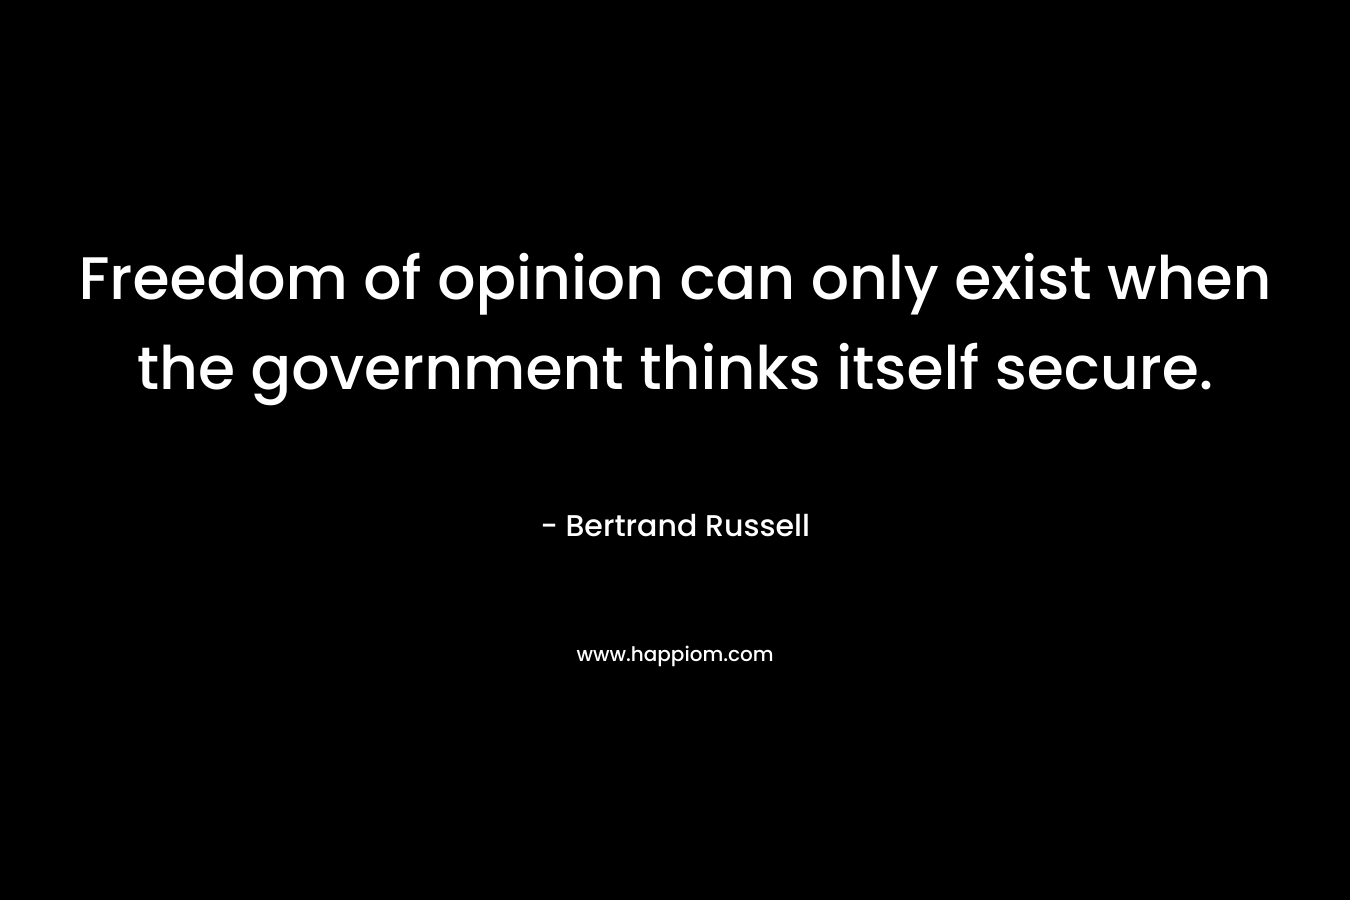 Freedom of opinion can only exist when the government thinks itself secure. – Bertrand Russell